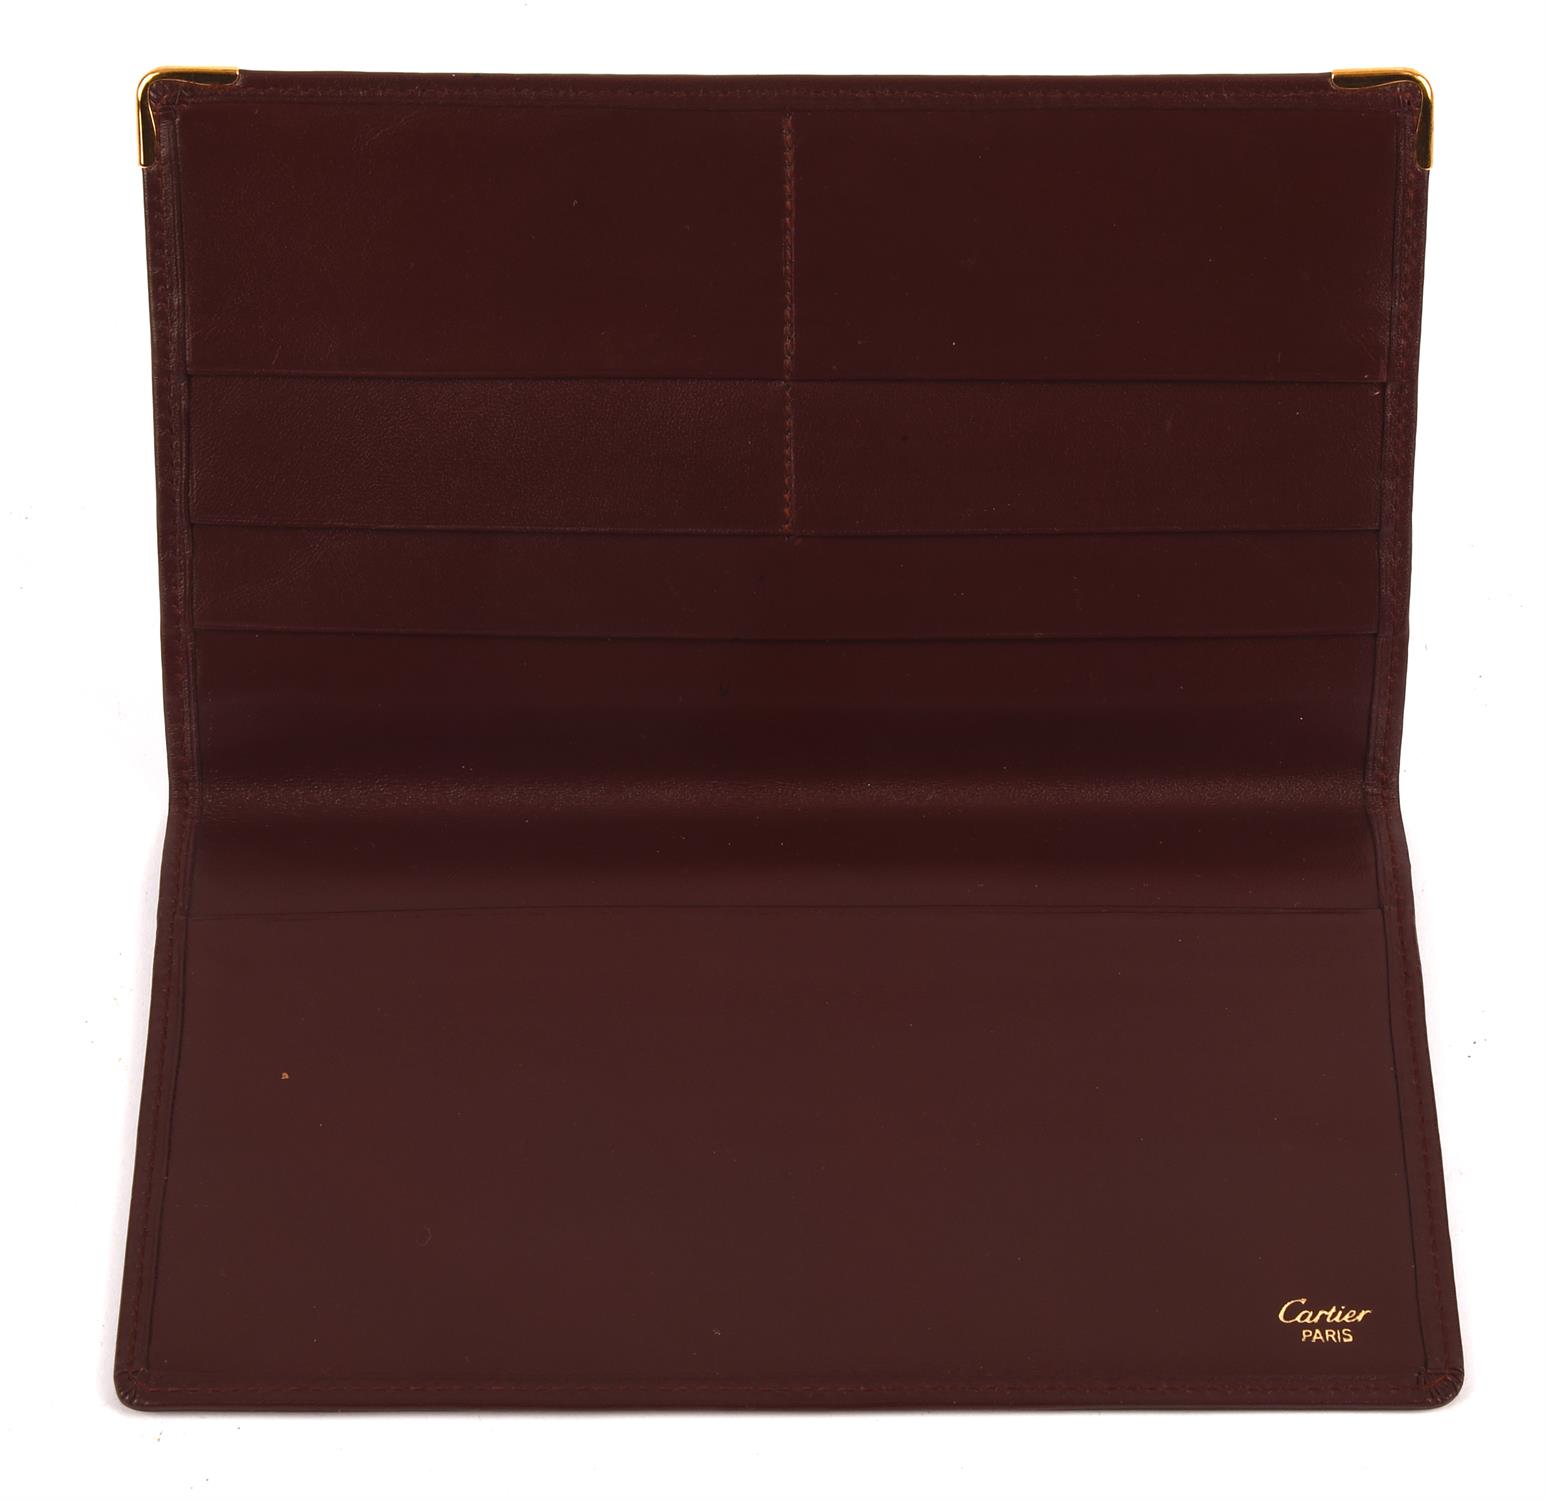 CARTIER burgundy bifold coat wallet with gold coloured hardware unused and unboxed (8cm x11cm) - Image 3 of 3